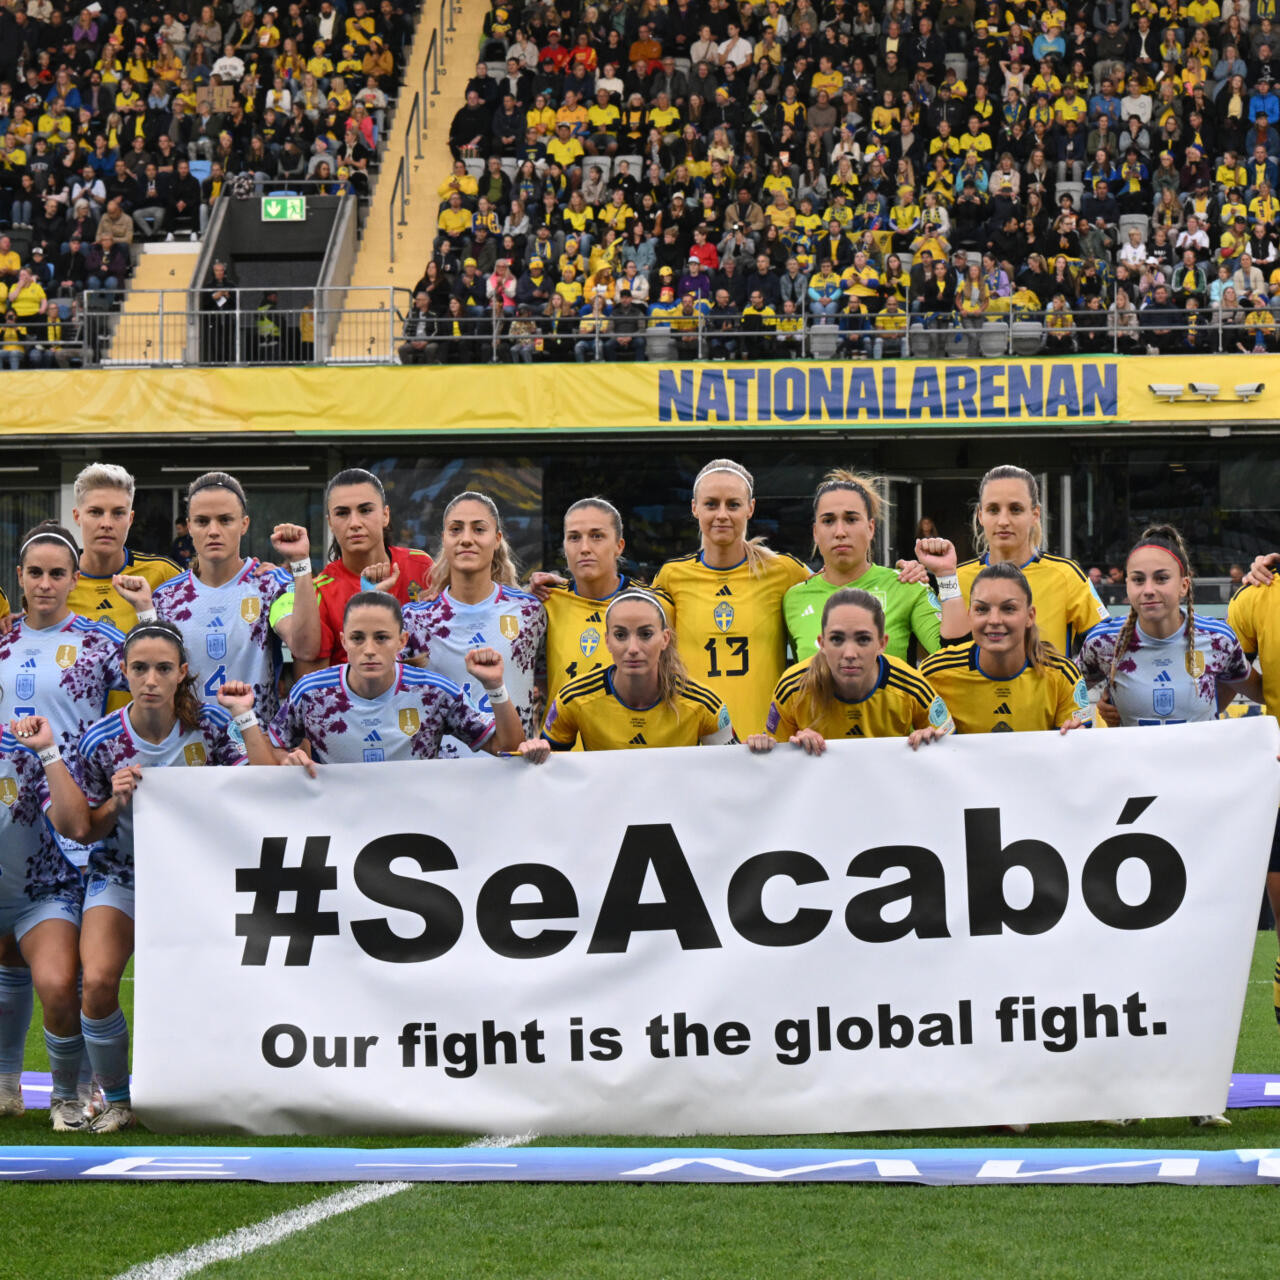 leading the cause the 22 players held up the banner bearing the spanish phrase se acabo adding that the struggle of the players against chauvinism was the global fight photo afp